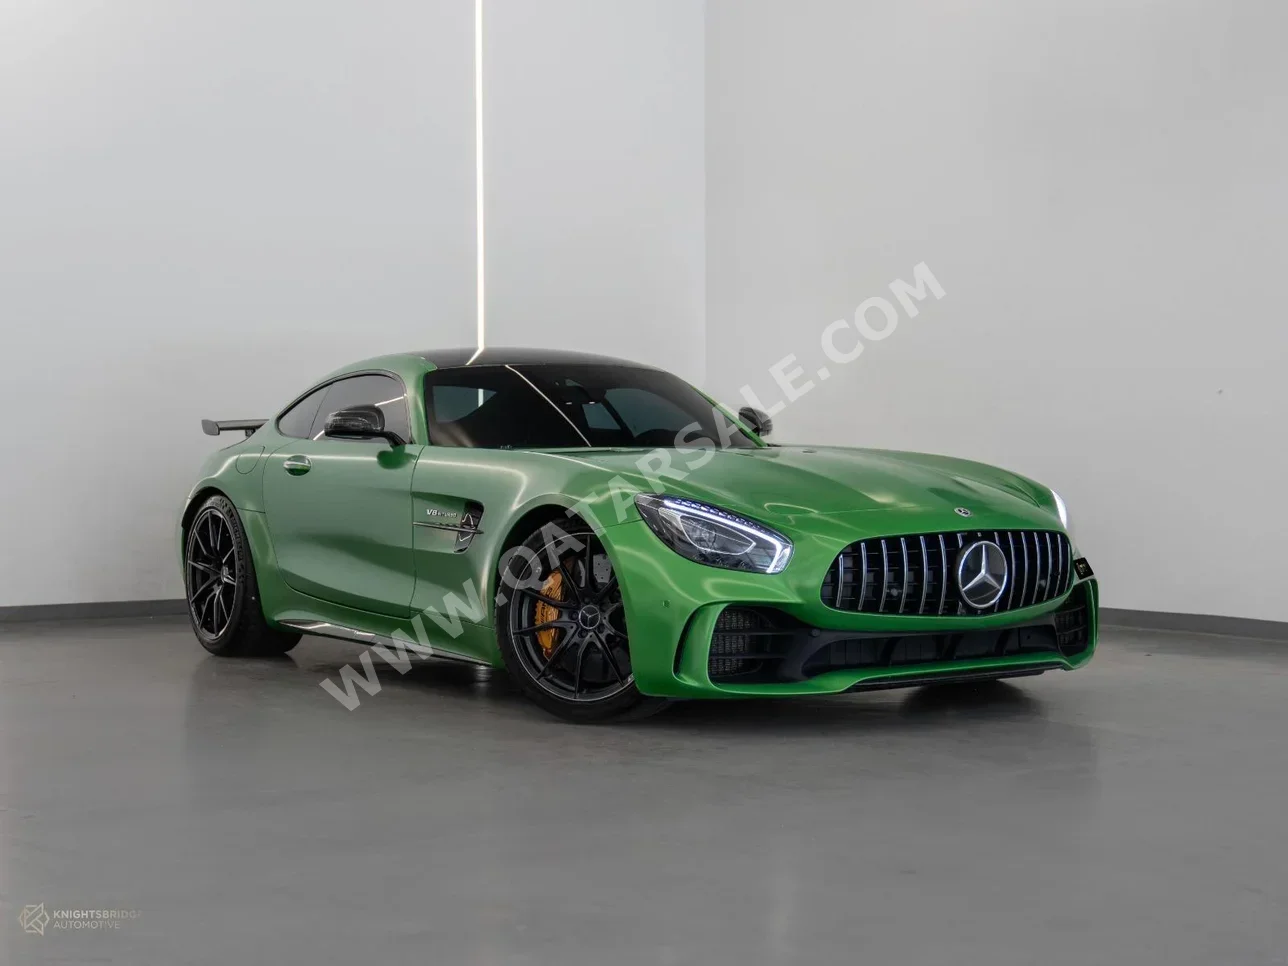 Mercedes-Benz  GT  R AMG  2019  Automatic  32,000 Km  8 Cylinder  Rear Wheel Drive (RWD)  Coupe / Sport  Green